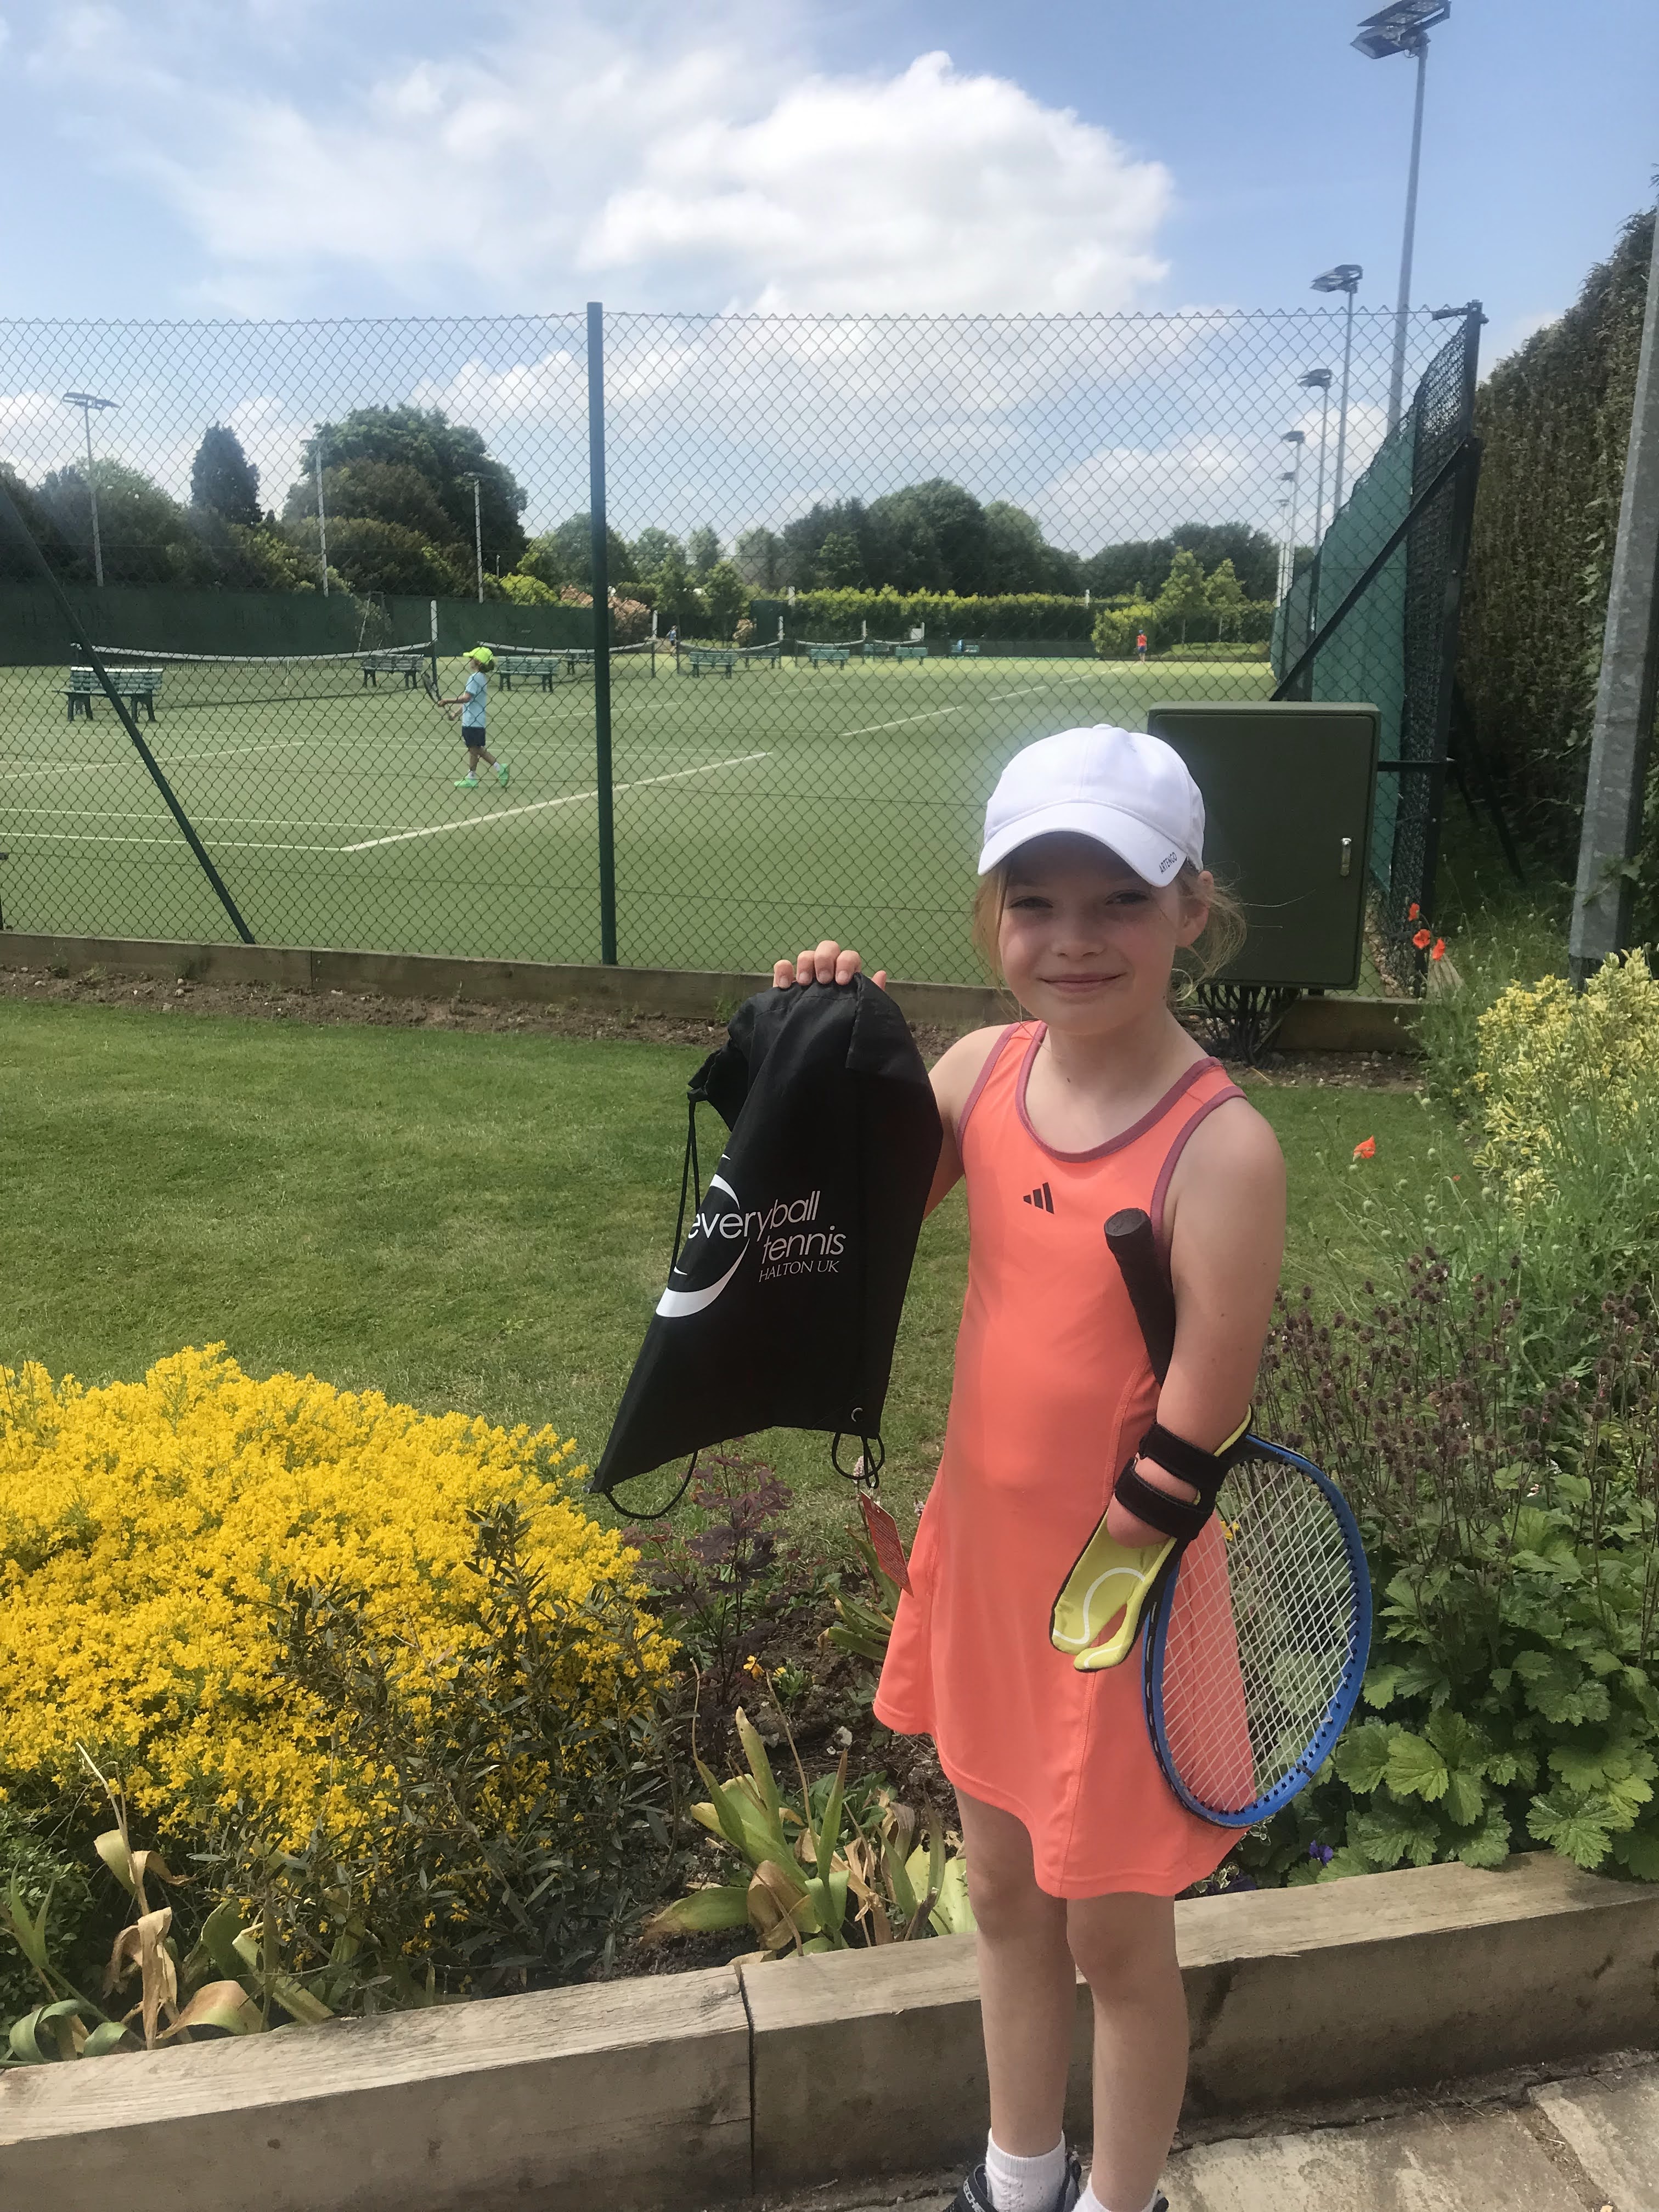 Joanie Melady holding a tennis racket after playing her first tournament